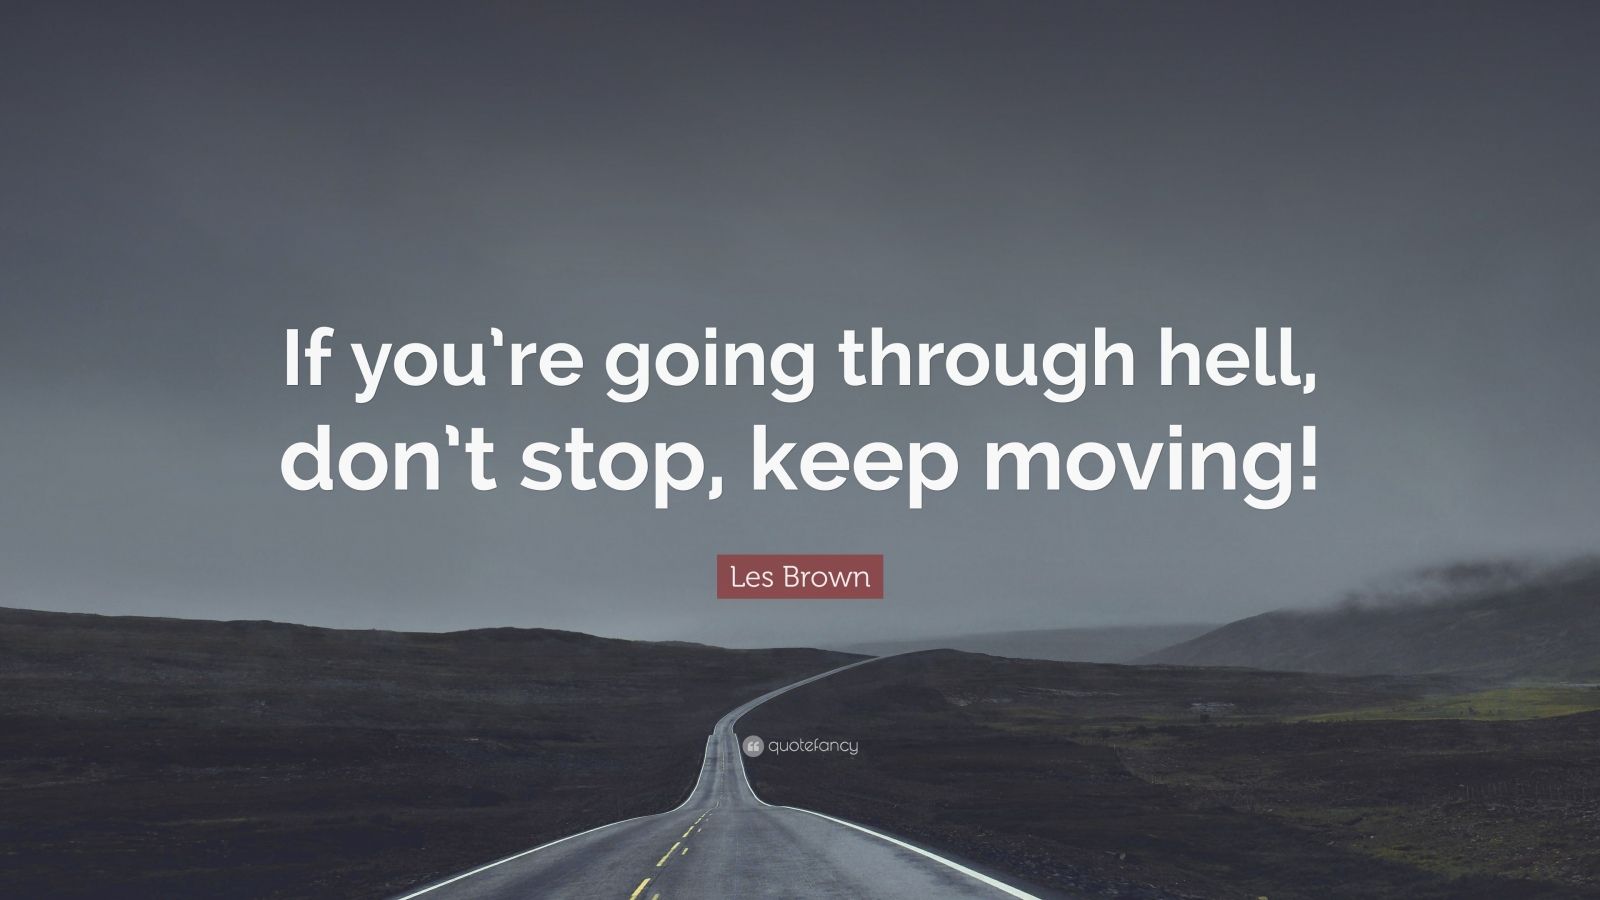 Les Brown Quote: “If you&#39;re going through hell, don&#39;t stop, keep moving!”